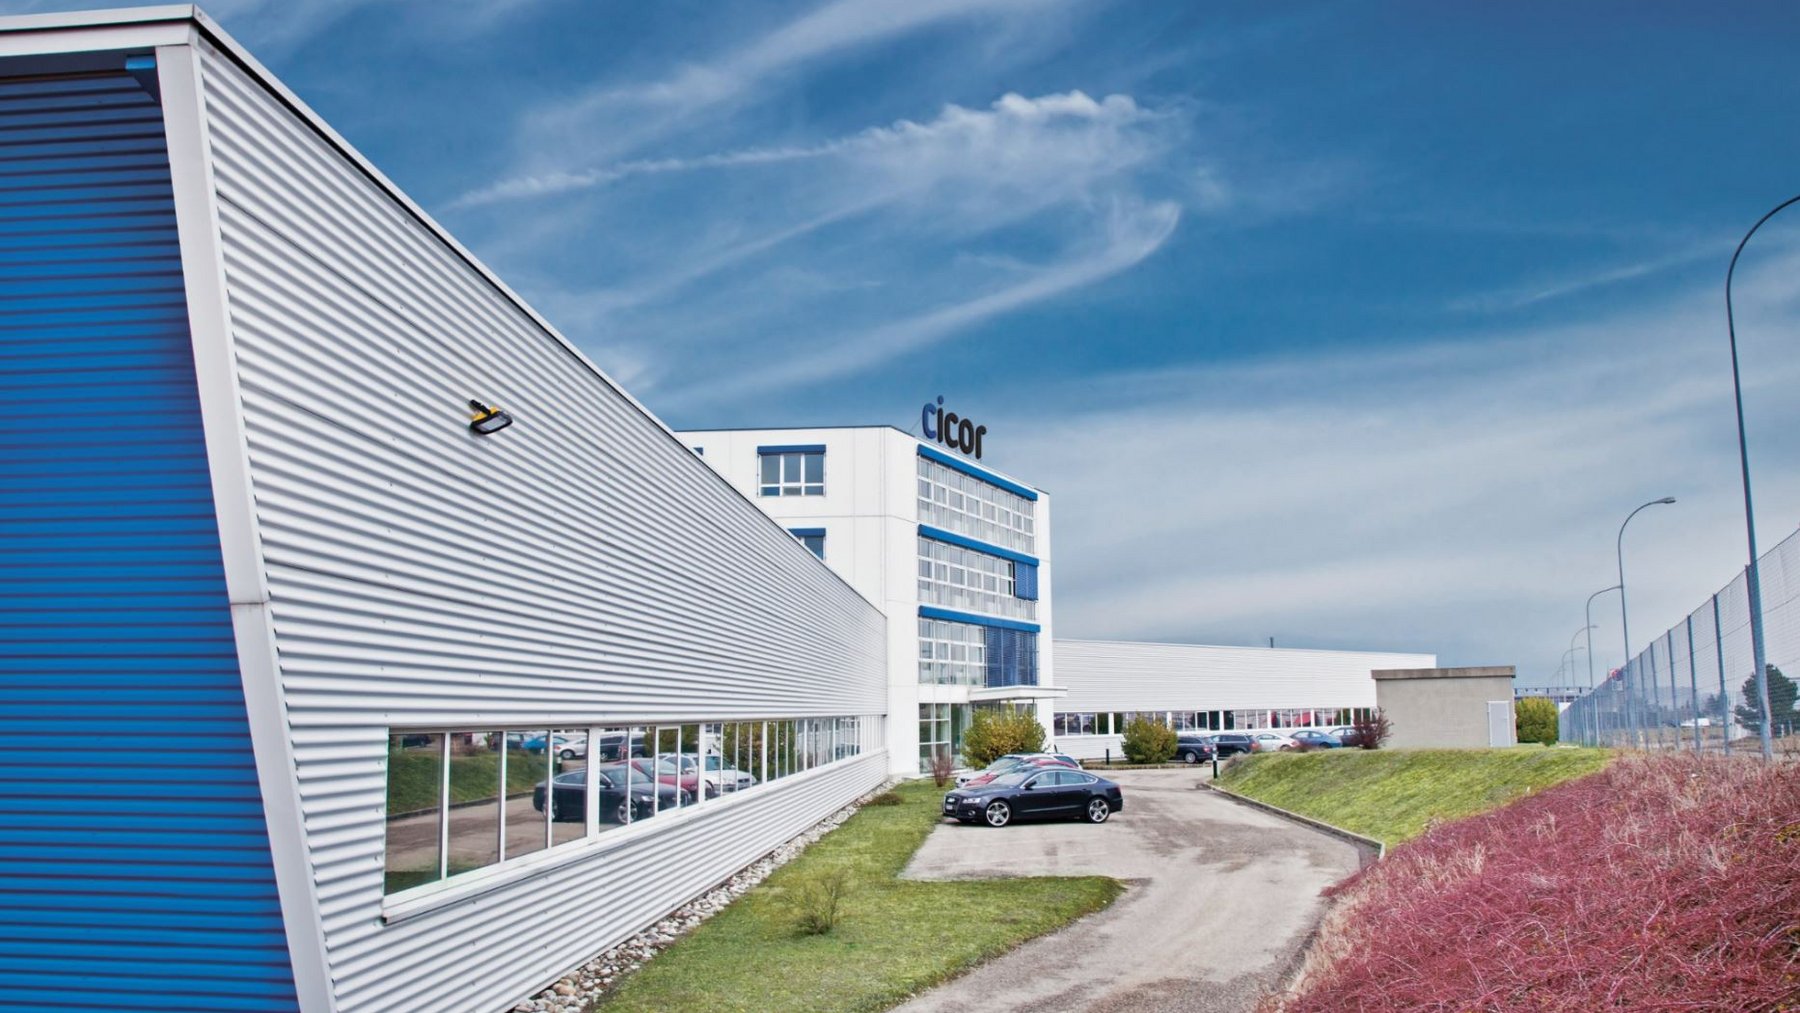 Cicor production site in Boudry Switzerland